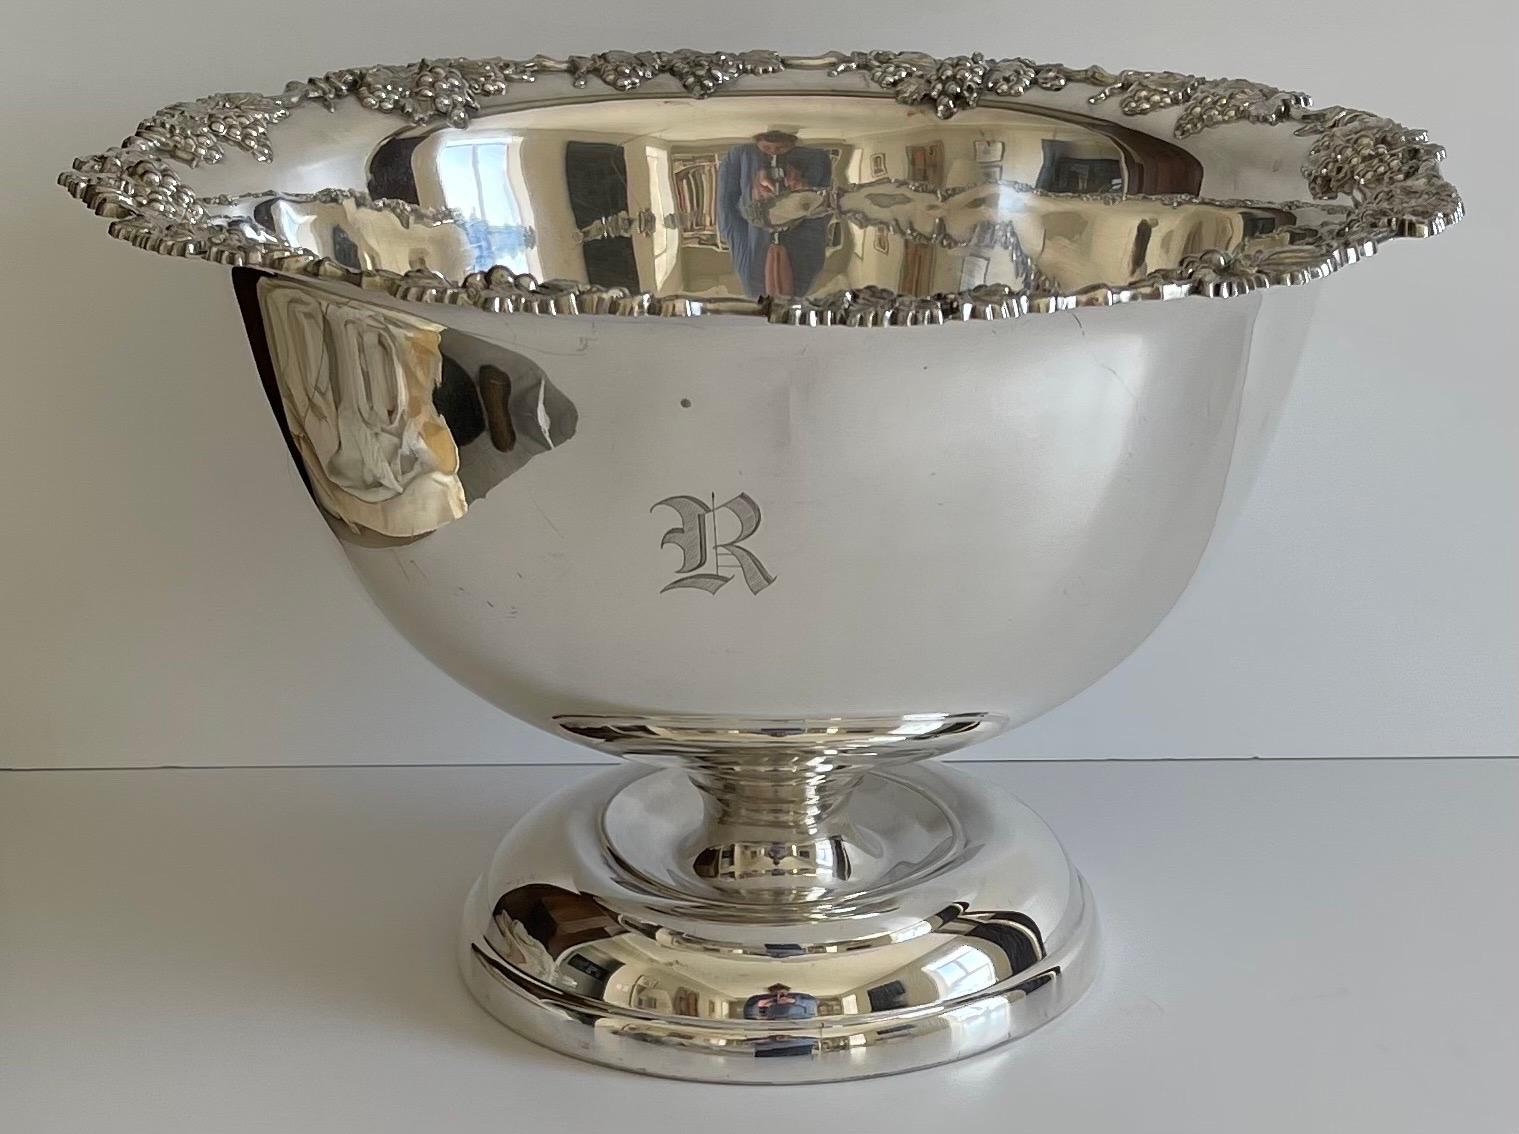 Large 1950s silver plated punch bowl. Hand engraved R single letter monogram. Newly re-plated and polished to a high shine.